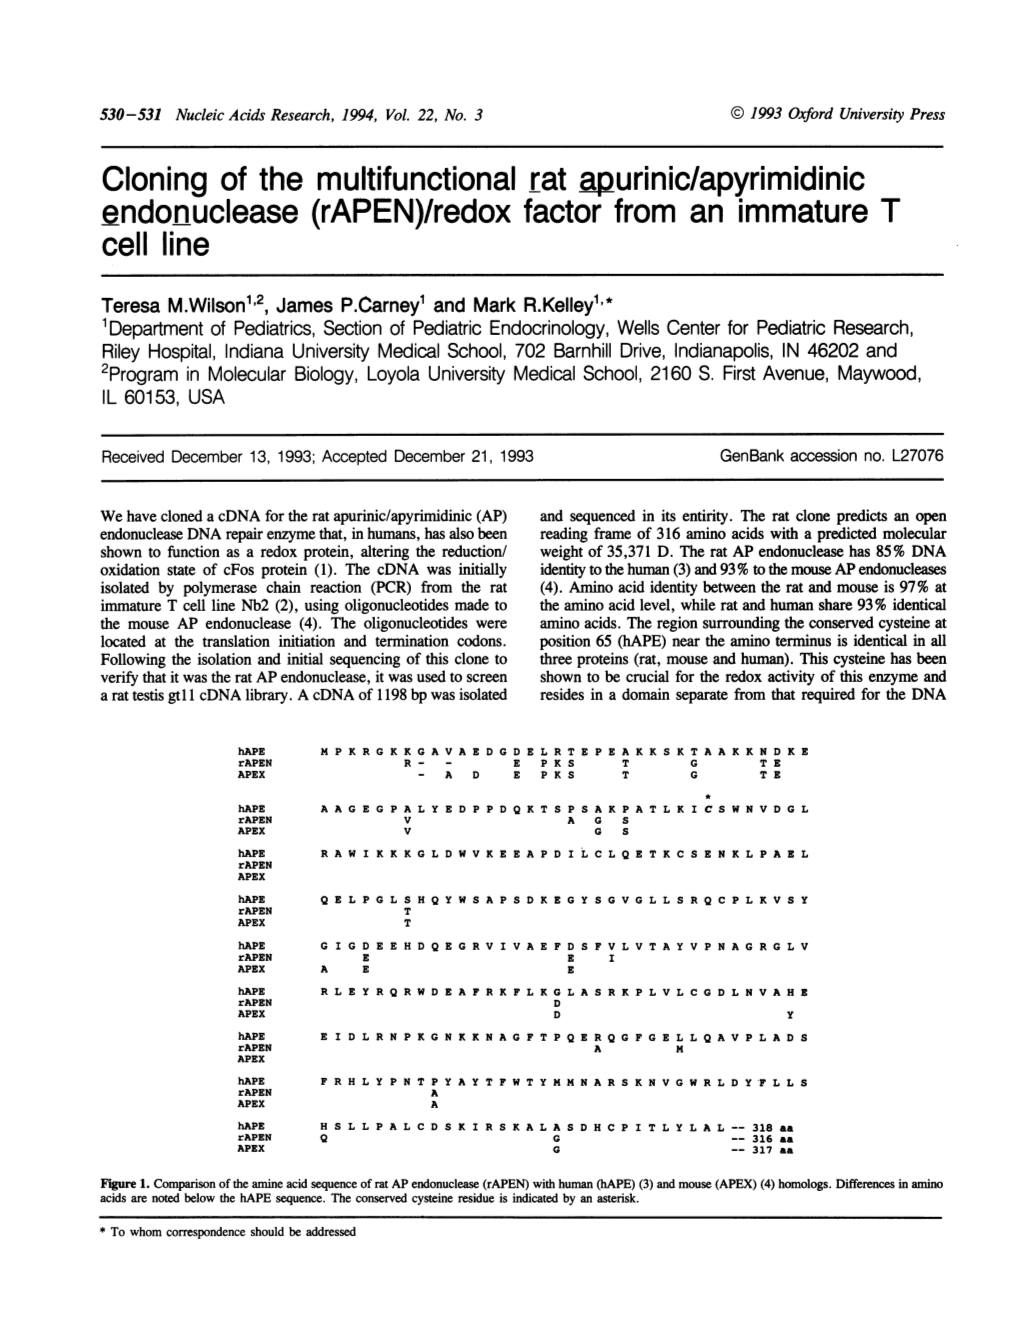 Endonuclease (Rapen)/Redox Factor from an Immature T Cell Line